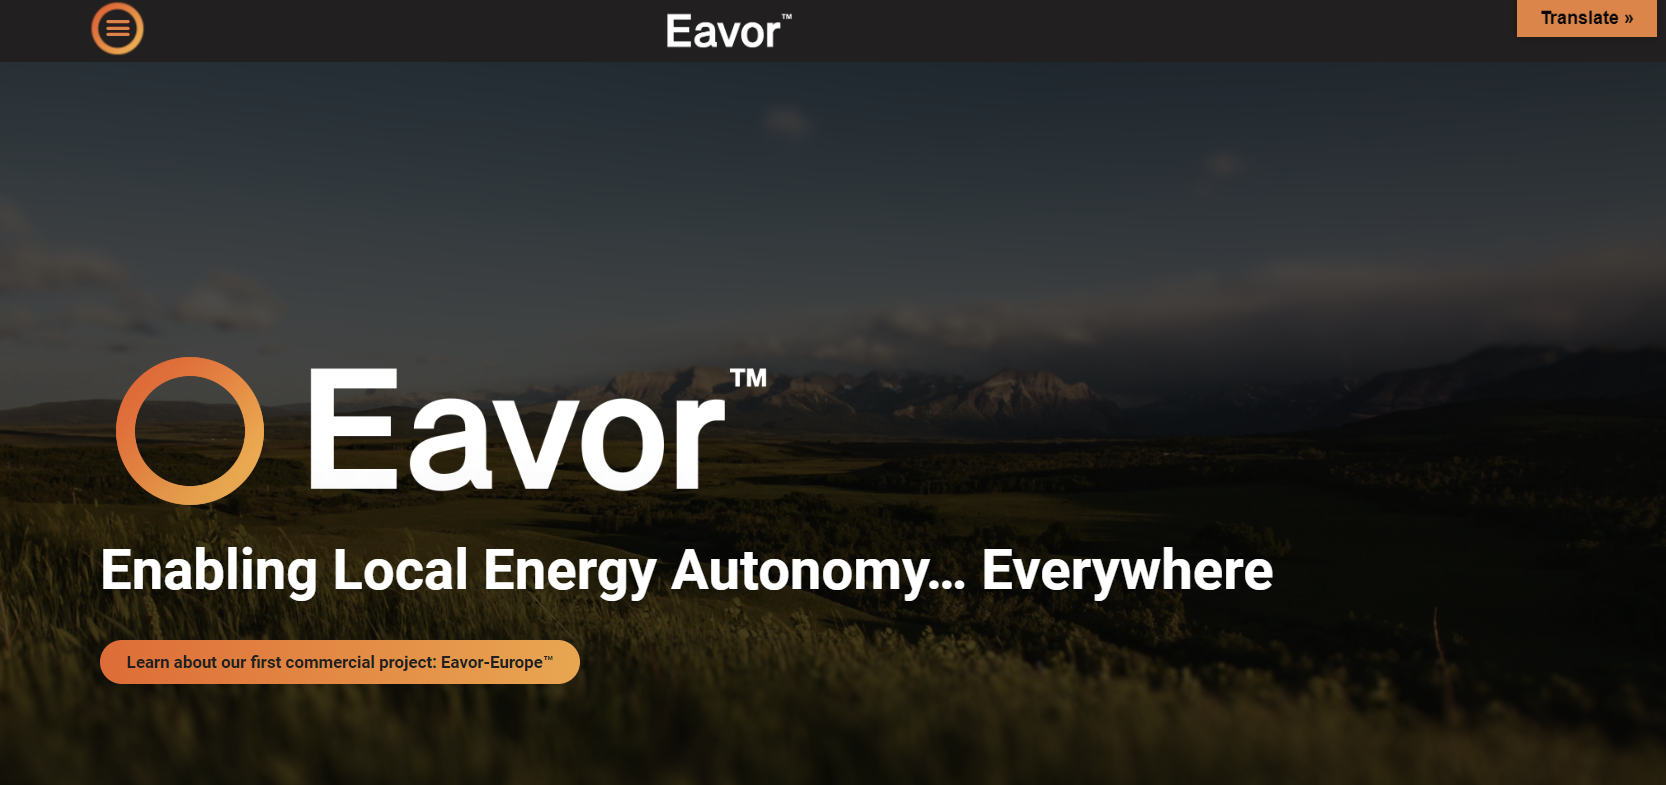 Eavor is a leading geothermal technology company